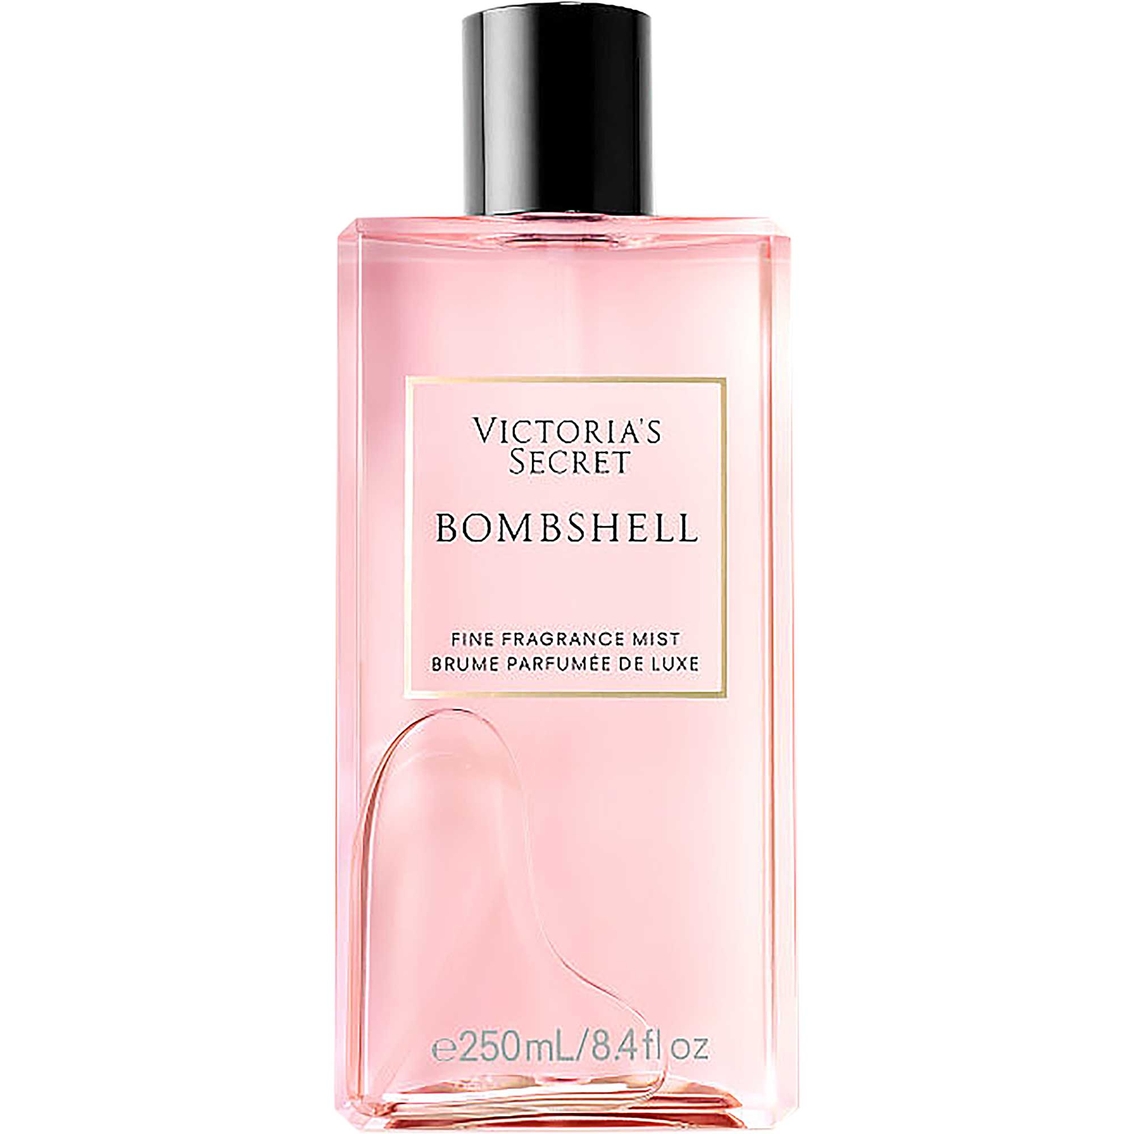 Victorias Secret Bombshell Perfume Review: The Ultimate Fragrance Guide ...